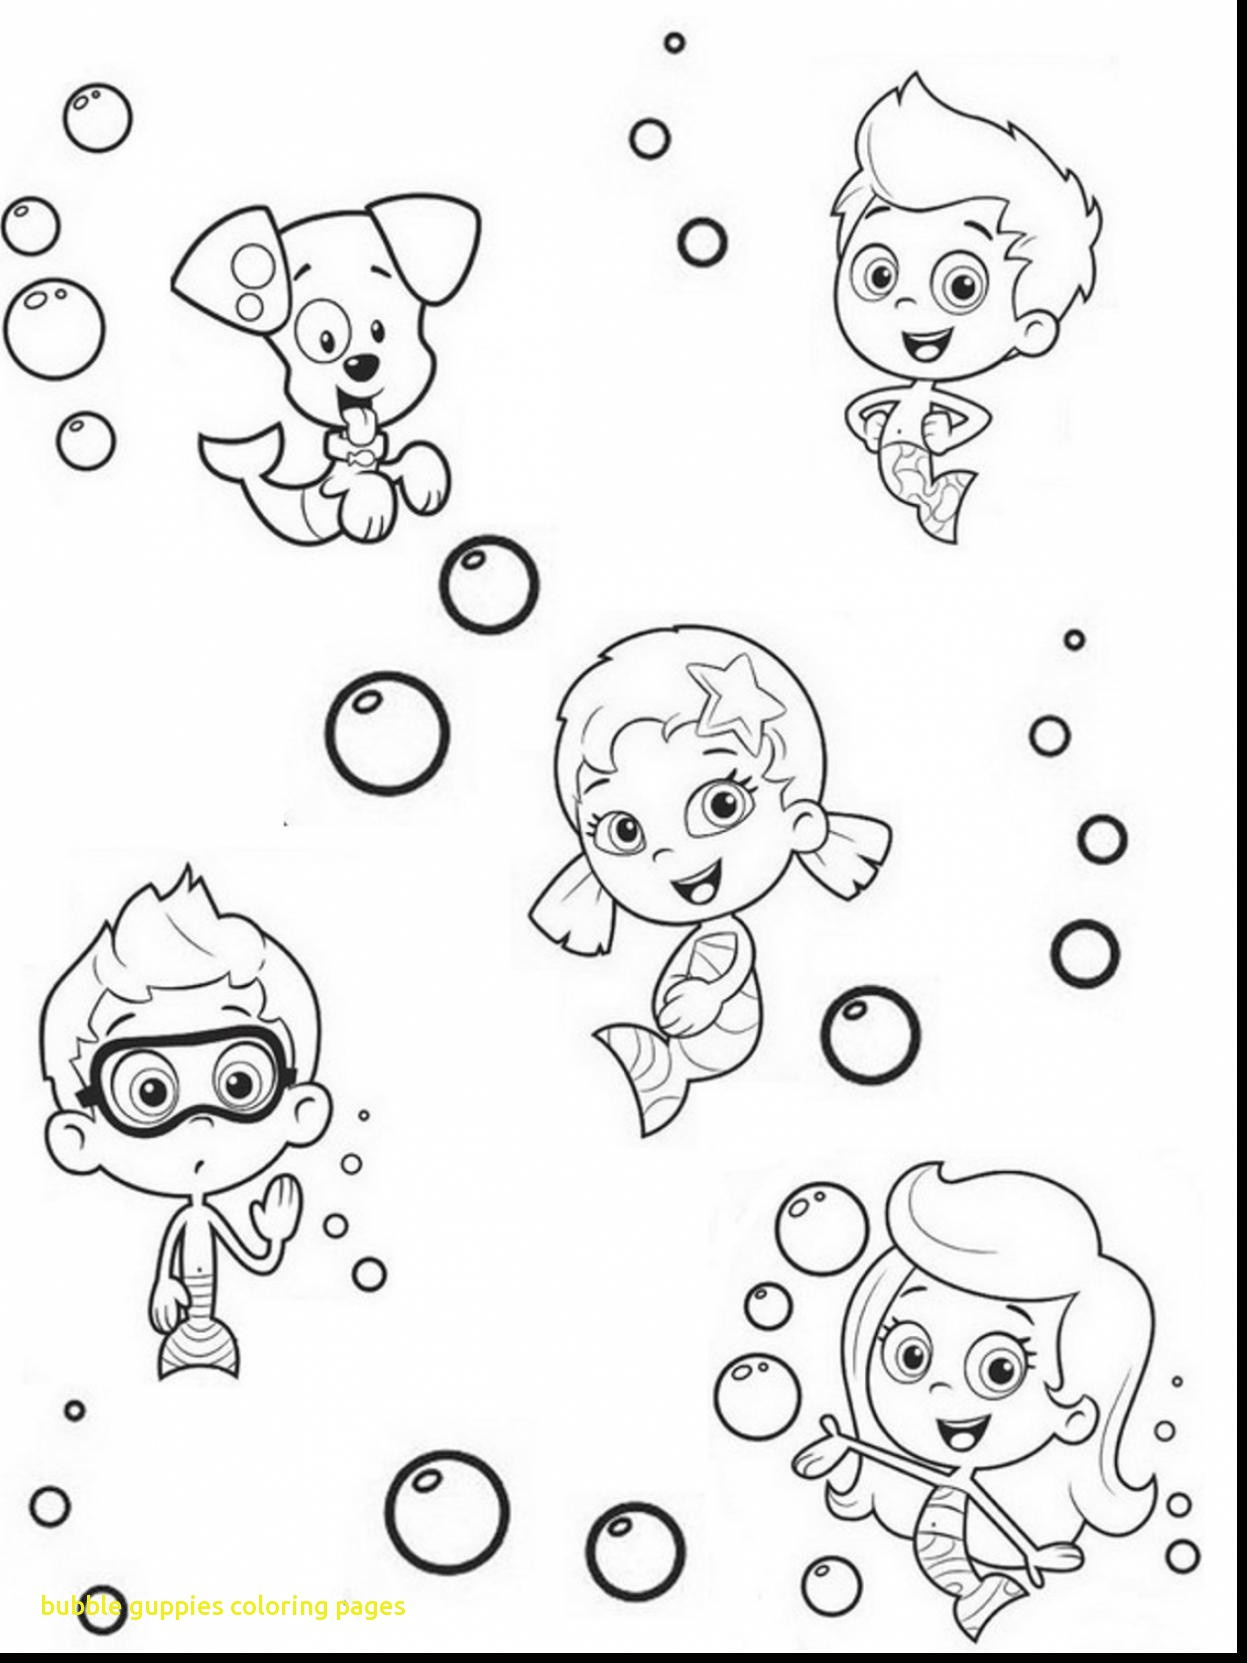 Printable Bubble Guppies Coloring Pages Bubble Guppies Coloring Pages Fr Kinder Bubble Guppies Coloring